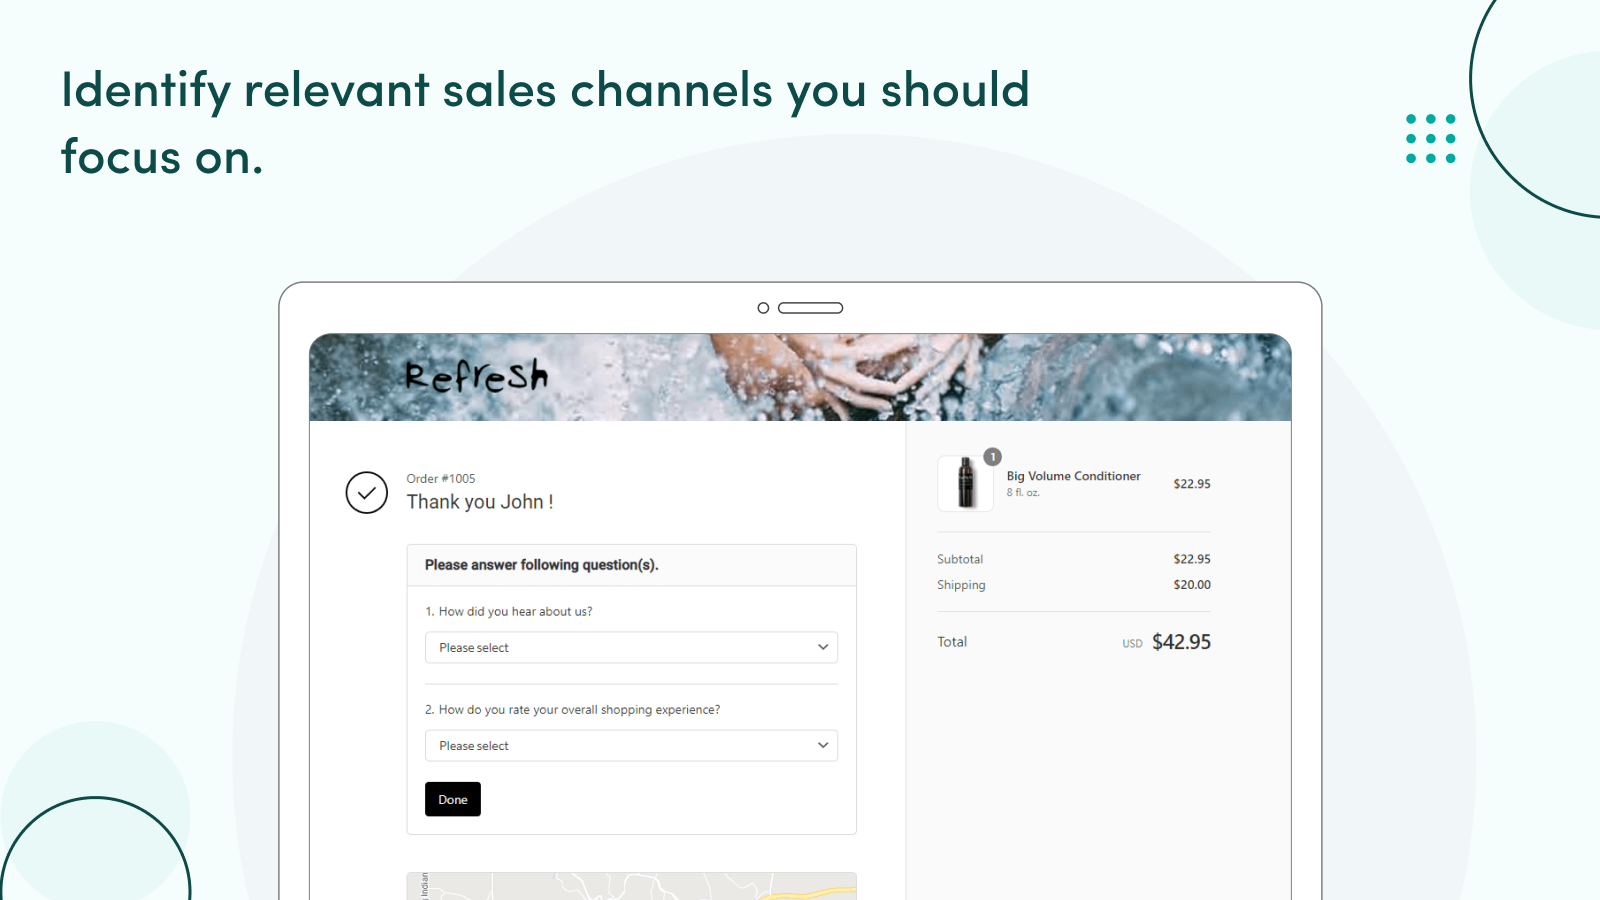 Use Post Purchase Forms to determine all relevant sales channels